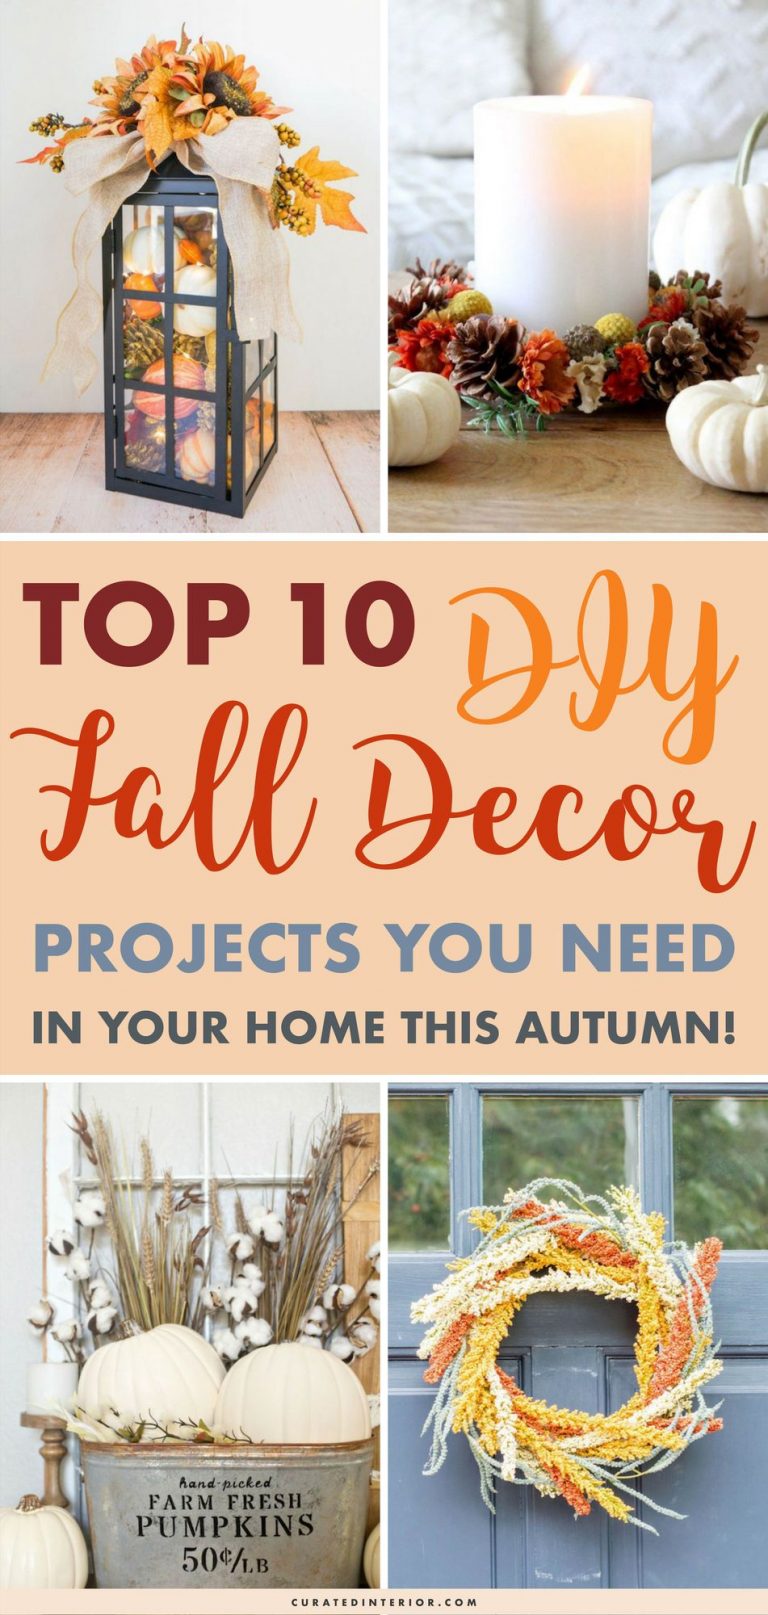 DIY Fall Decor: 10 DIY Autumn Projects You Can do at Home!